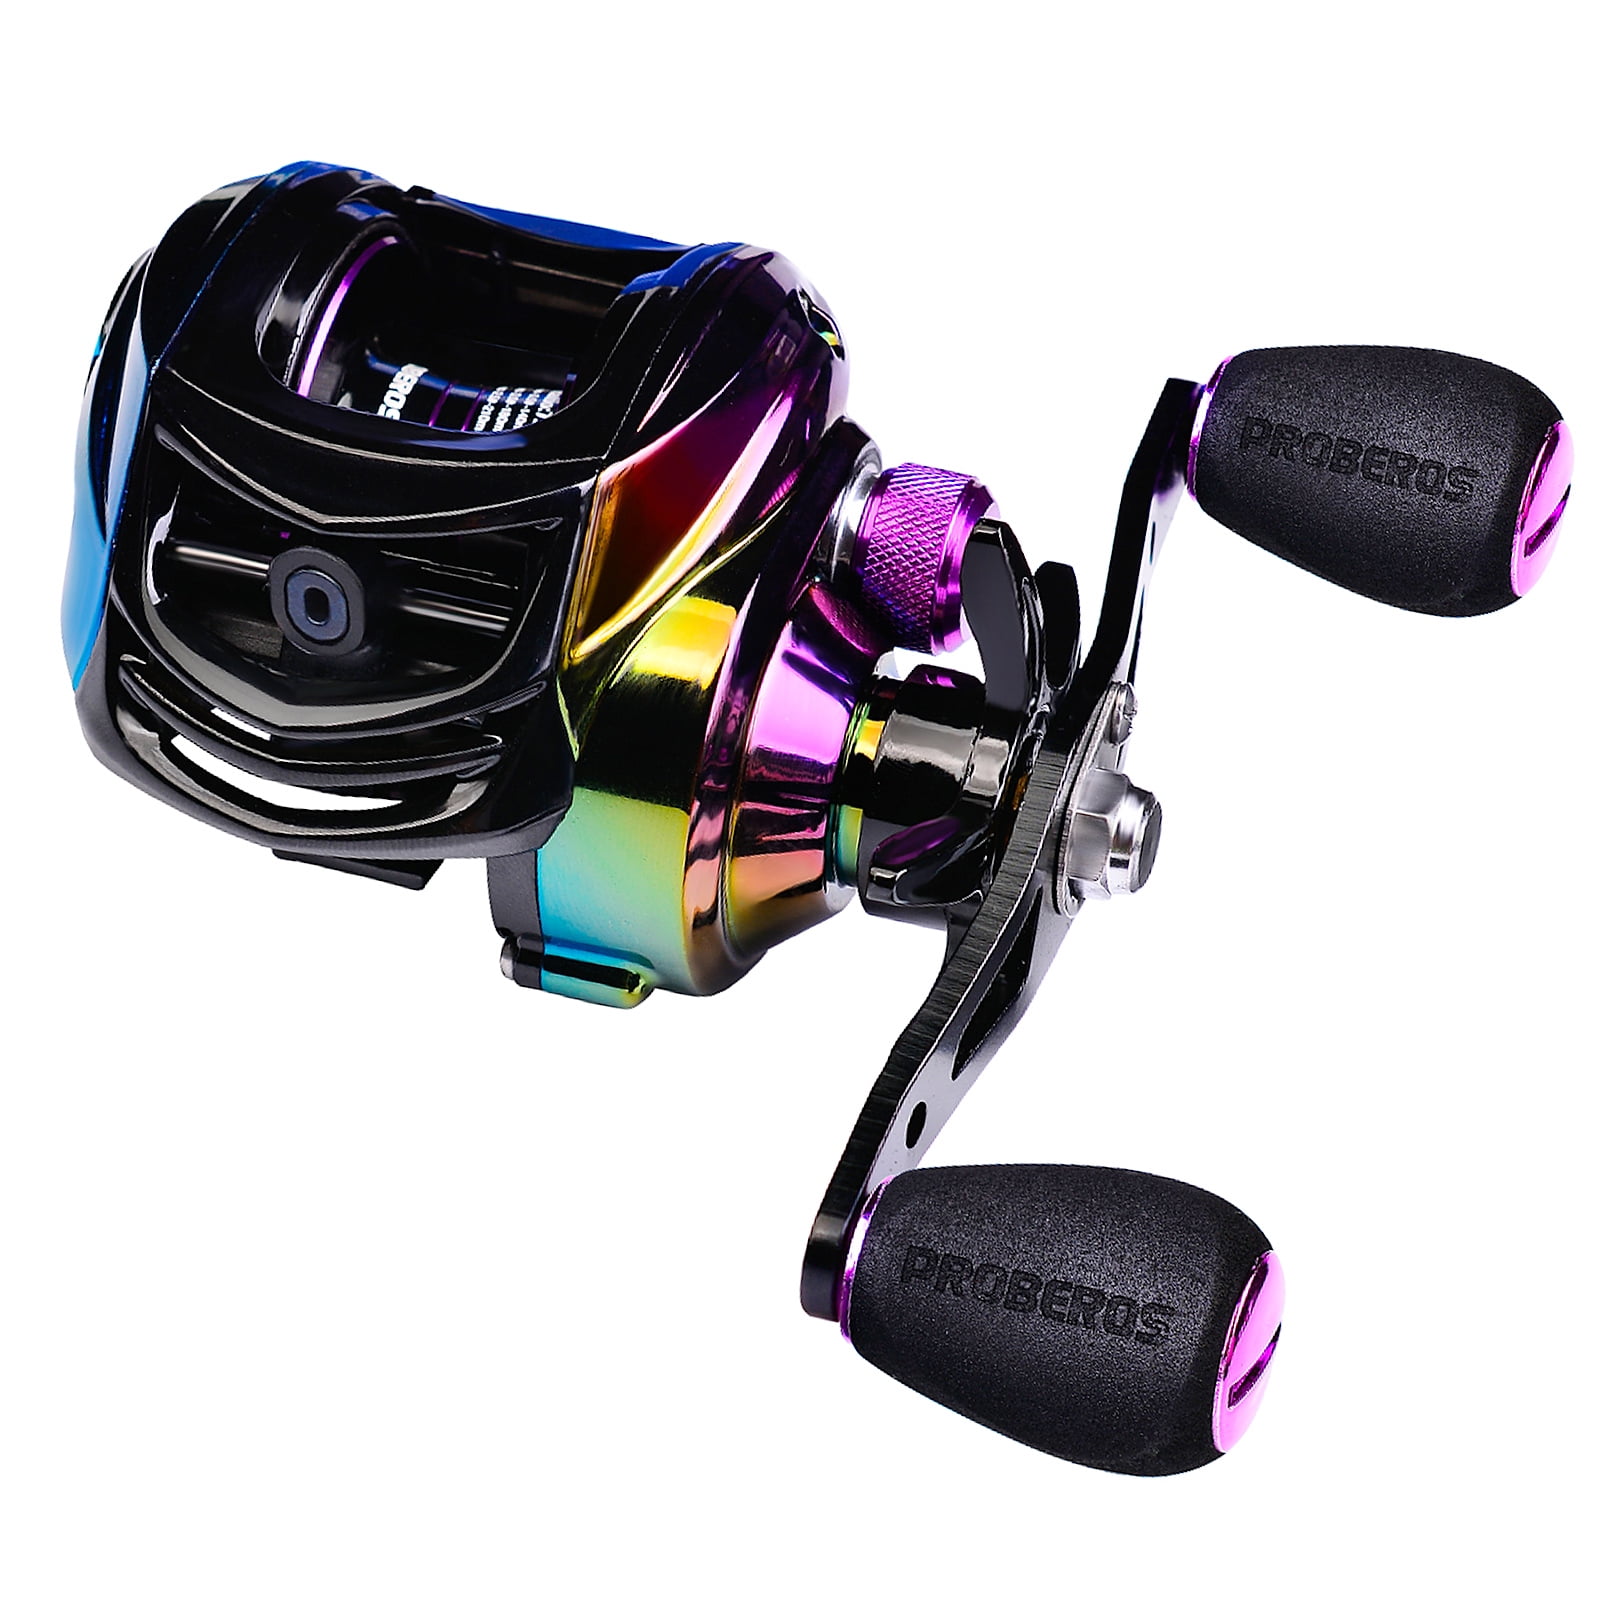 Should I Use a Left or Right Hand Casting Reel